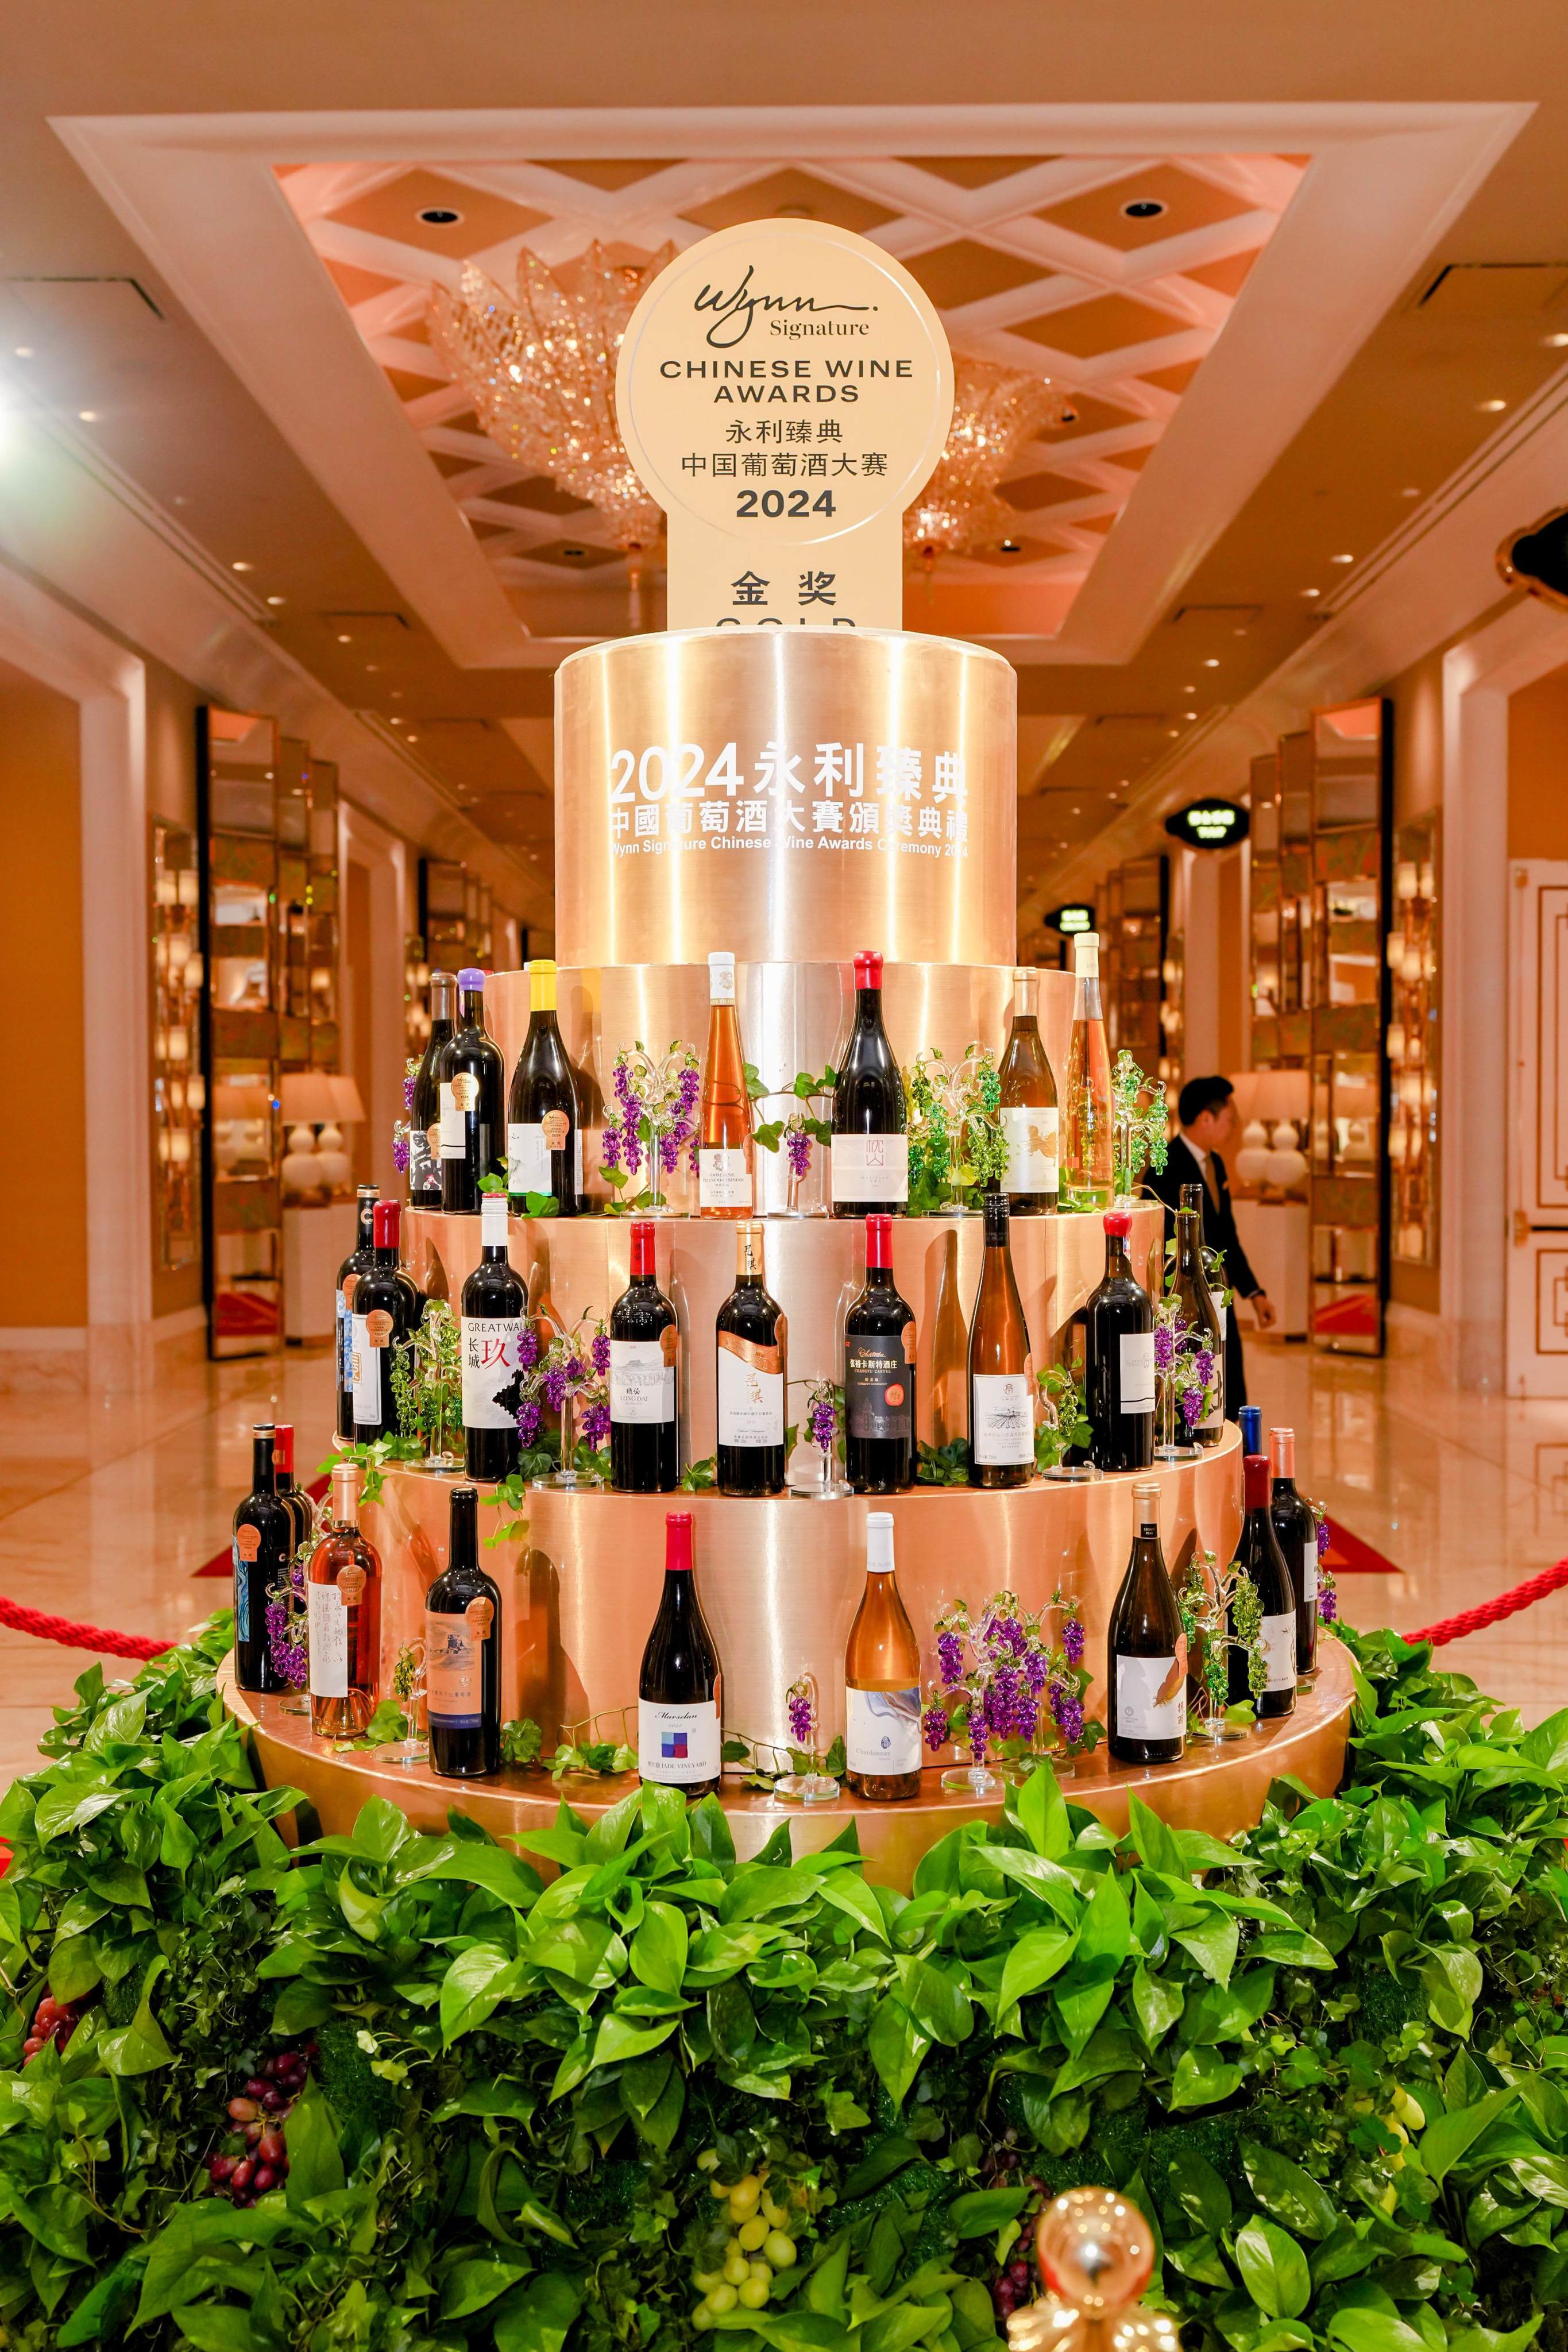 A display at the Wynn Signature Chinese Wine Awards, which crowned China’s best wine, as well as best red, best white, best sweet and best value wines, among others. 